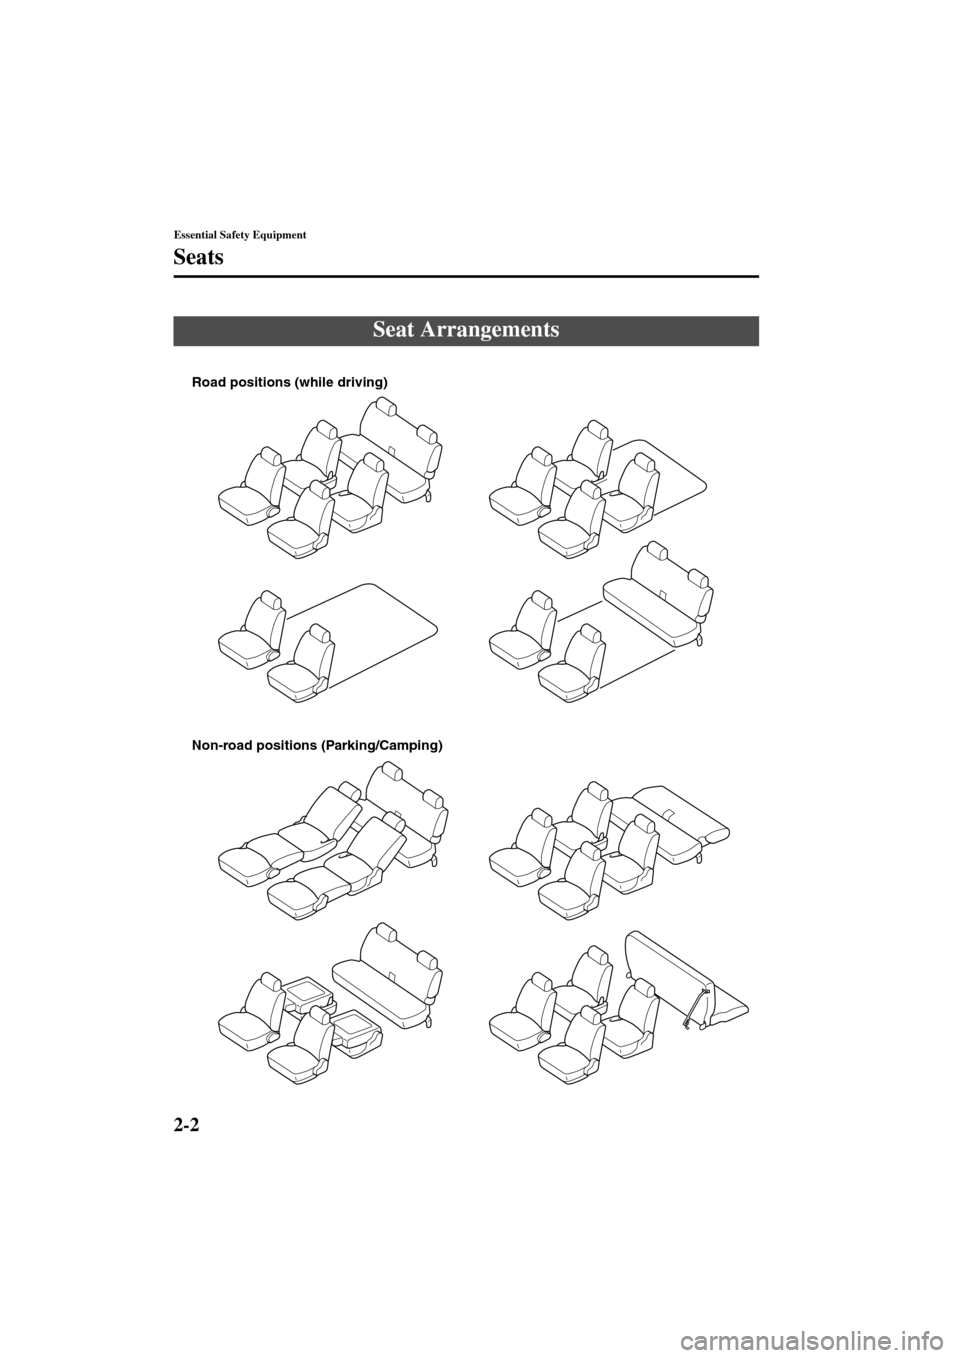 MAZDA MODEL MPV 2004   (in English) User Guide 2-2
Essential Safety Equipment
Form No. 8S06-EA-03H
Seats
Seat Arrangements
Road positions (while driving)
Non-road positions (Parking/Camping)
J16R_8S06-EA-03H_Edition1.book  Page 2  Wednesday, July 